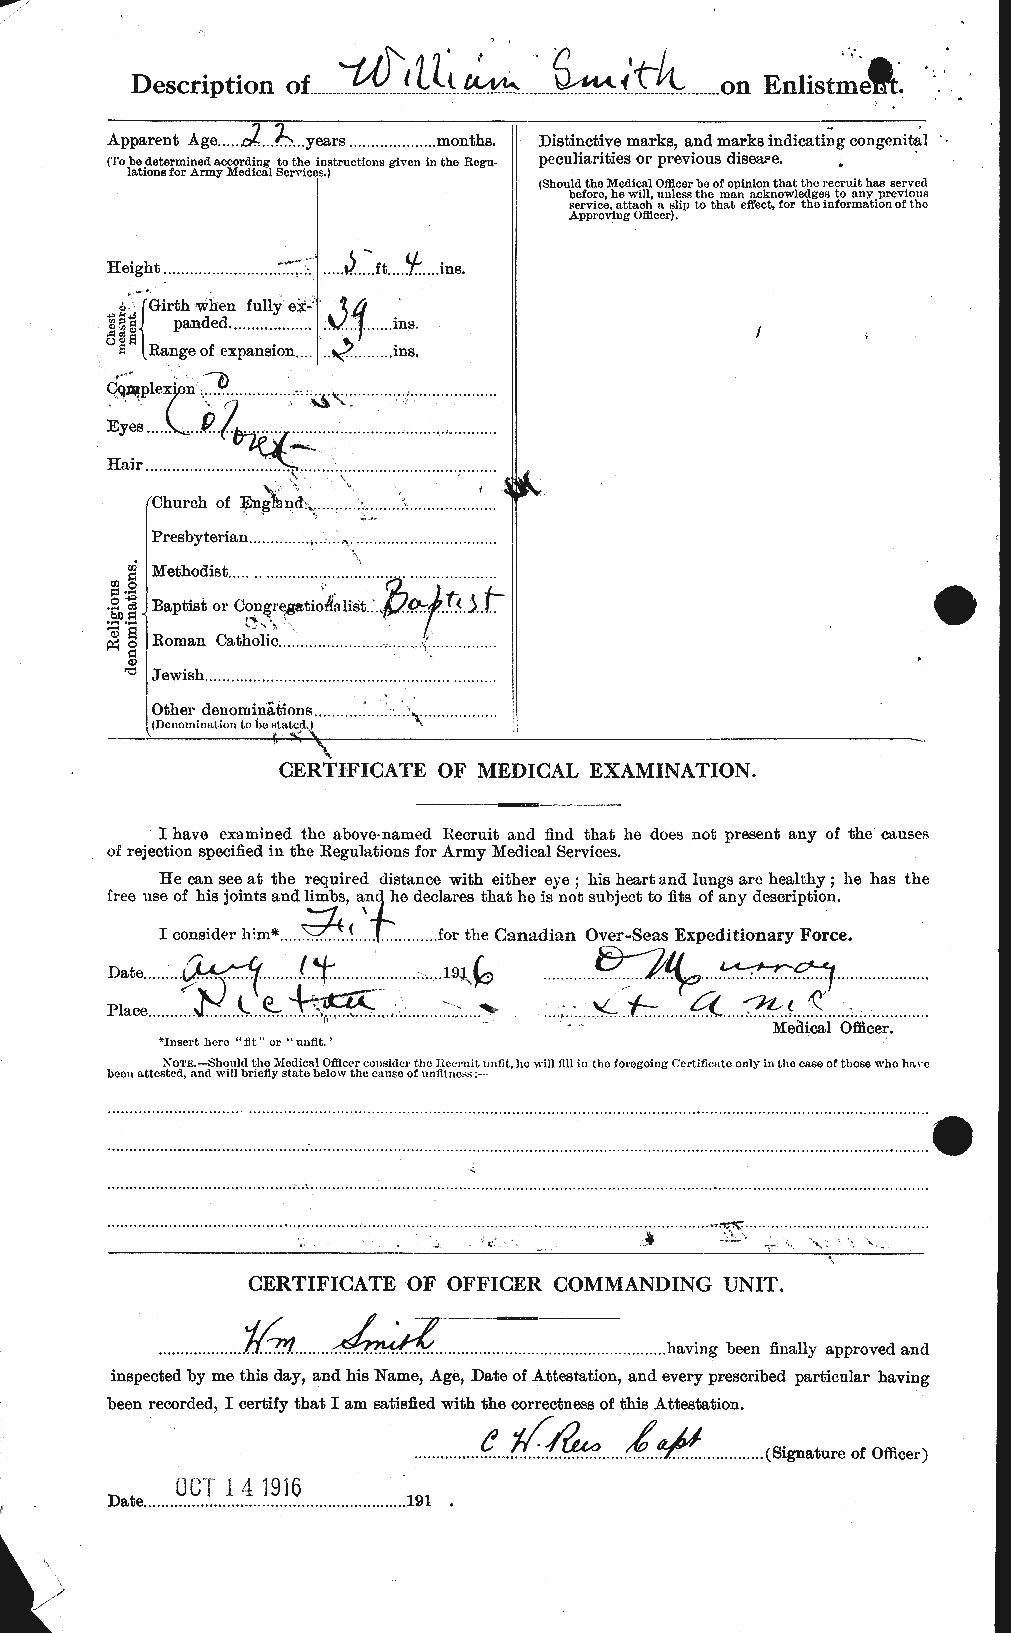 Personnel Records of the First World War - CEF 111332b